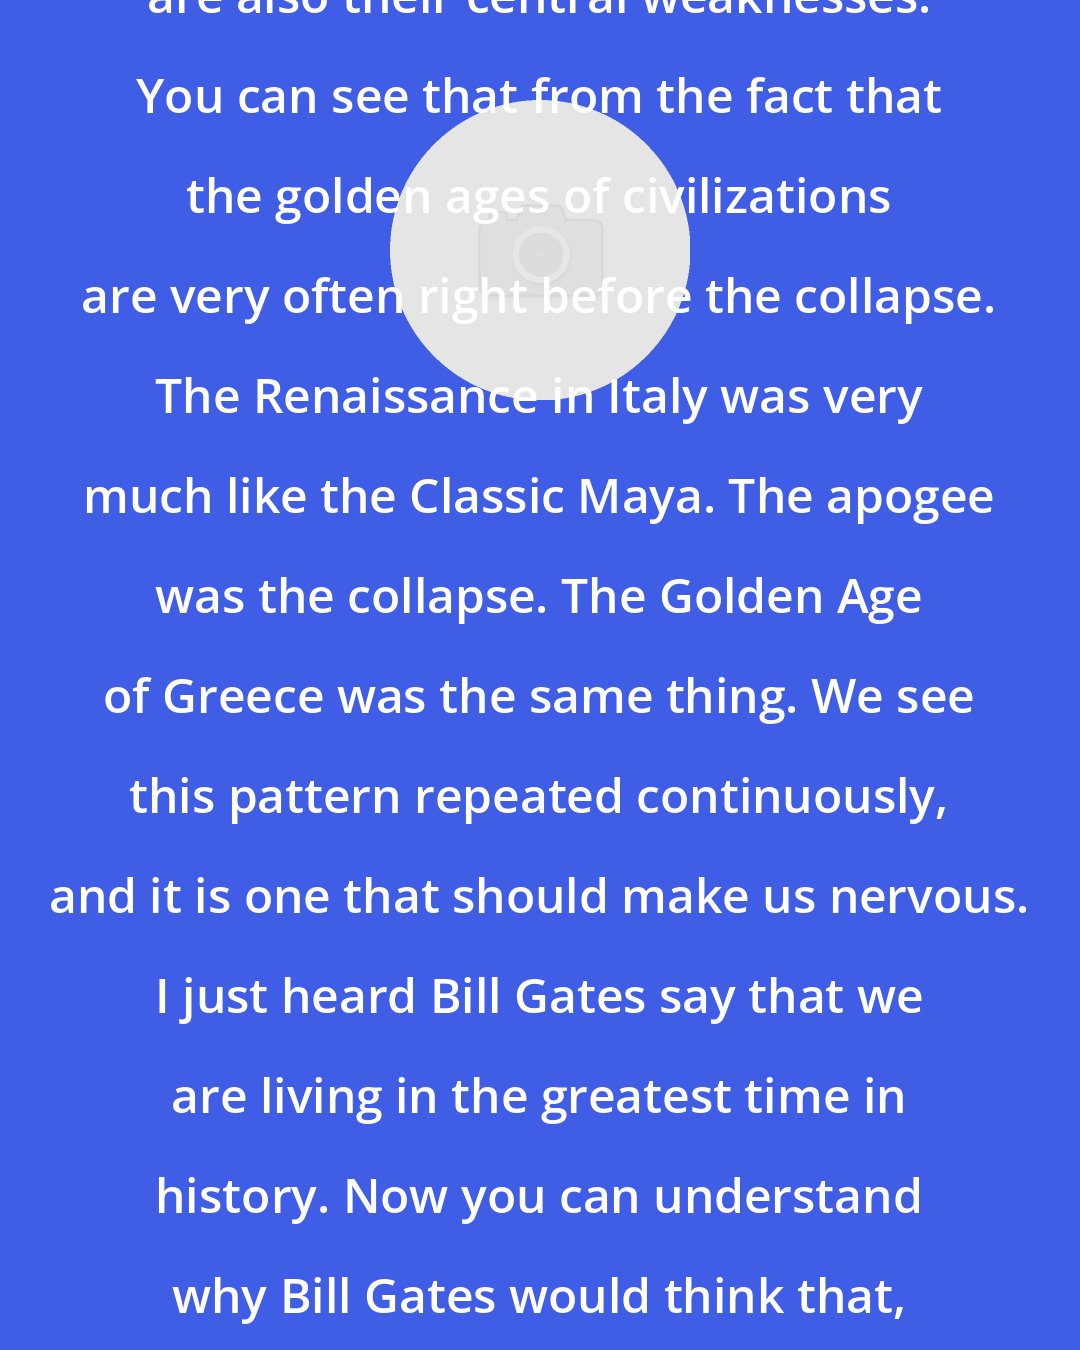 Arthur Demarest: The key strengths of civilizations are also their central weaknesses. You can see that from the fact that the golden ages of civilizations are very often right before the collapse. The Renaissance in Italy was very much like the Classic Maya. The apogee was the collapse. The Golden Age of Greece was the same thing. We see this pattern repeated continuously, and it is one that should make us nervous. I just heard Bill Gates say that we are living in the greatest time in history. Now you can understand why Bill Gates would think that, but even if he is right, that is an ominous thing to say.